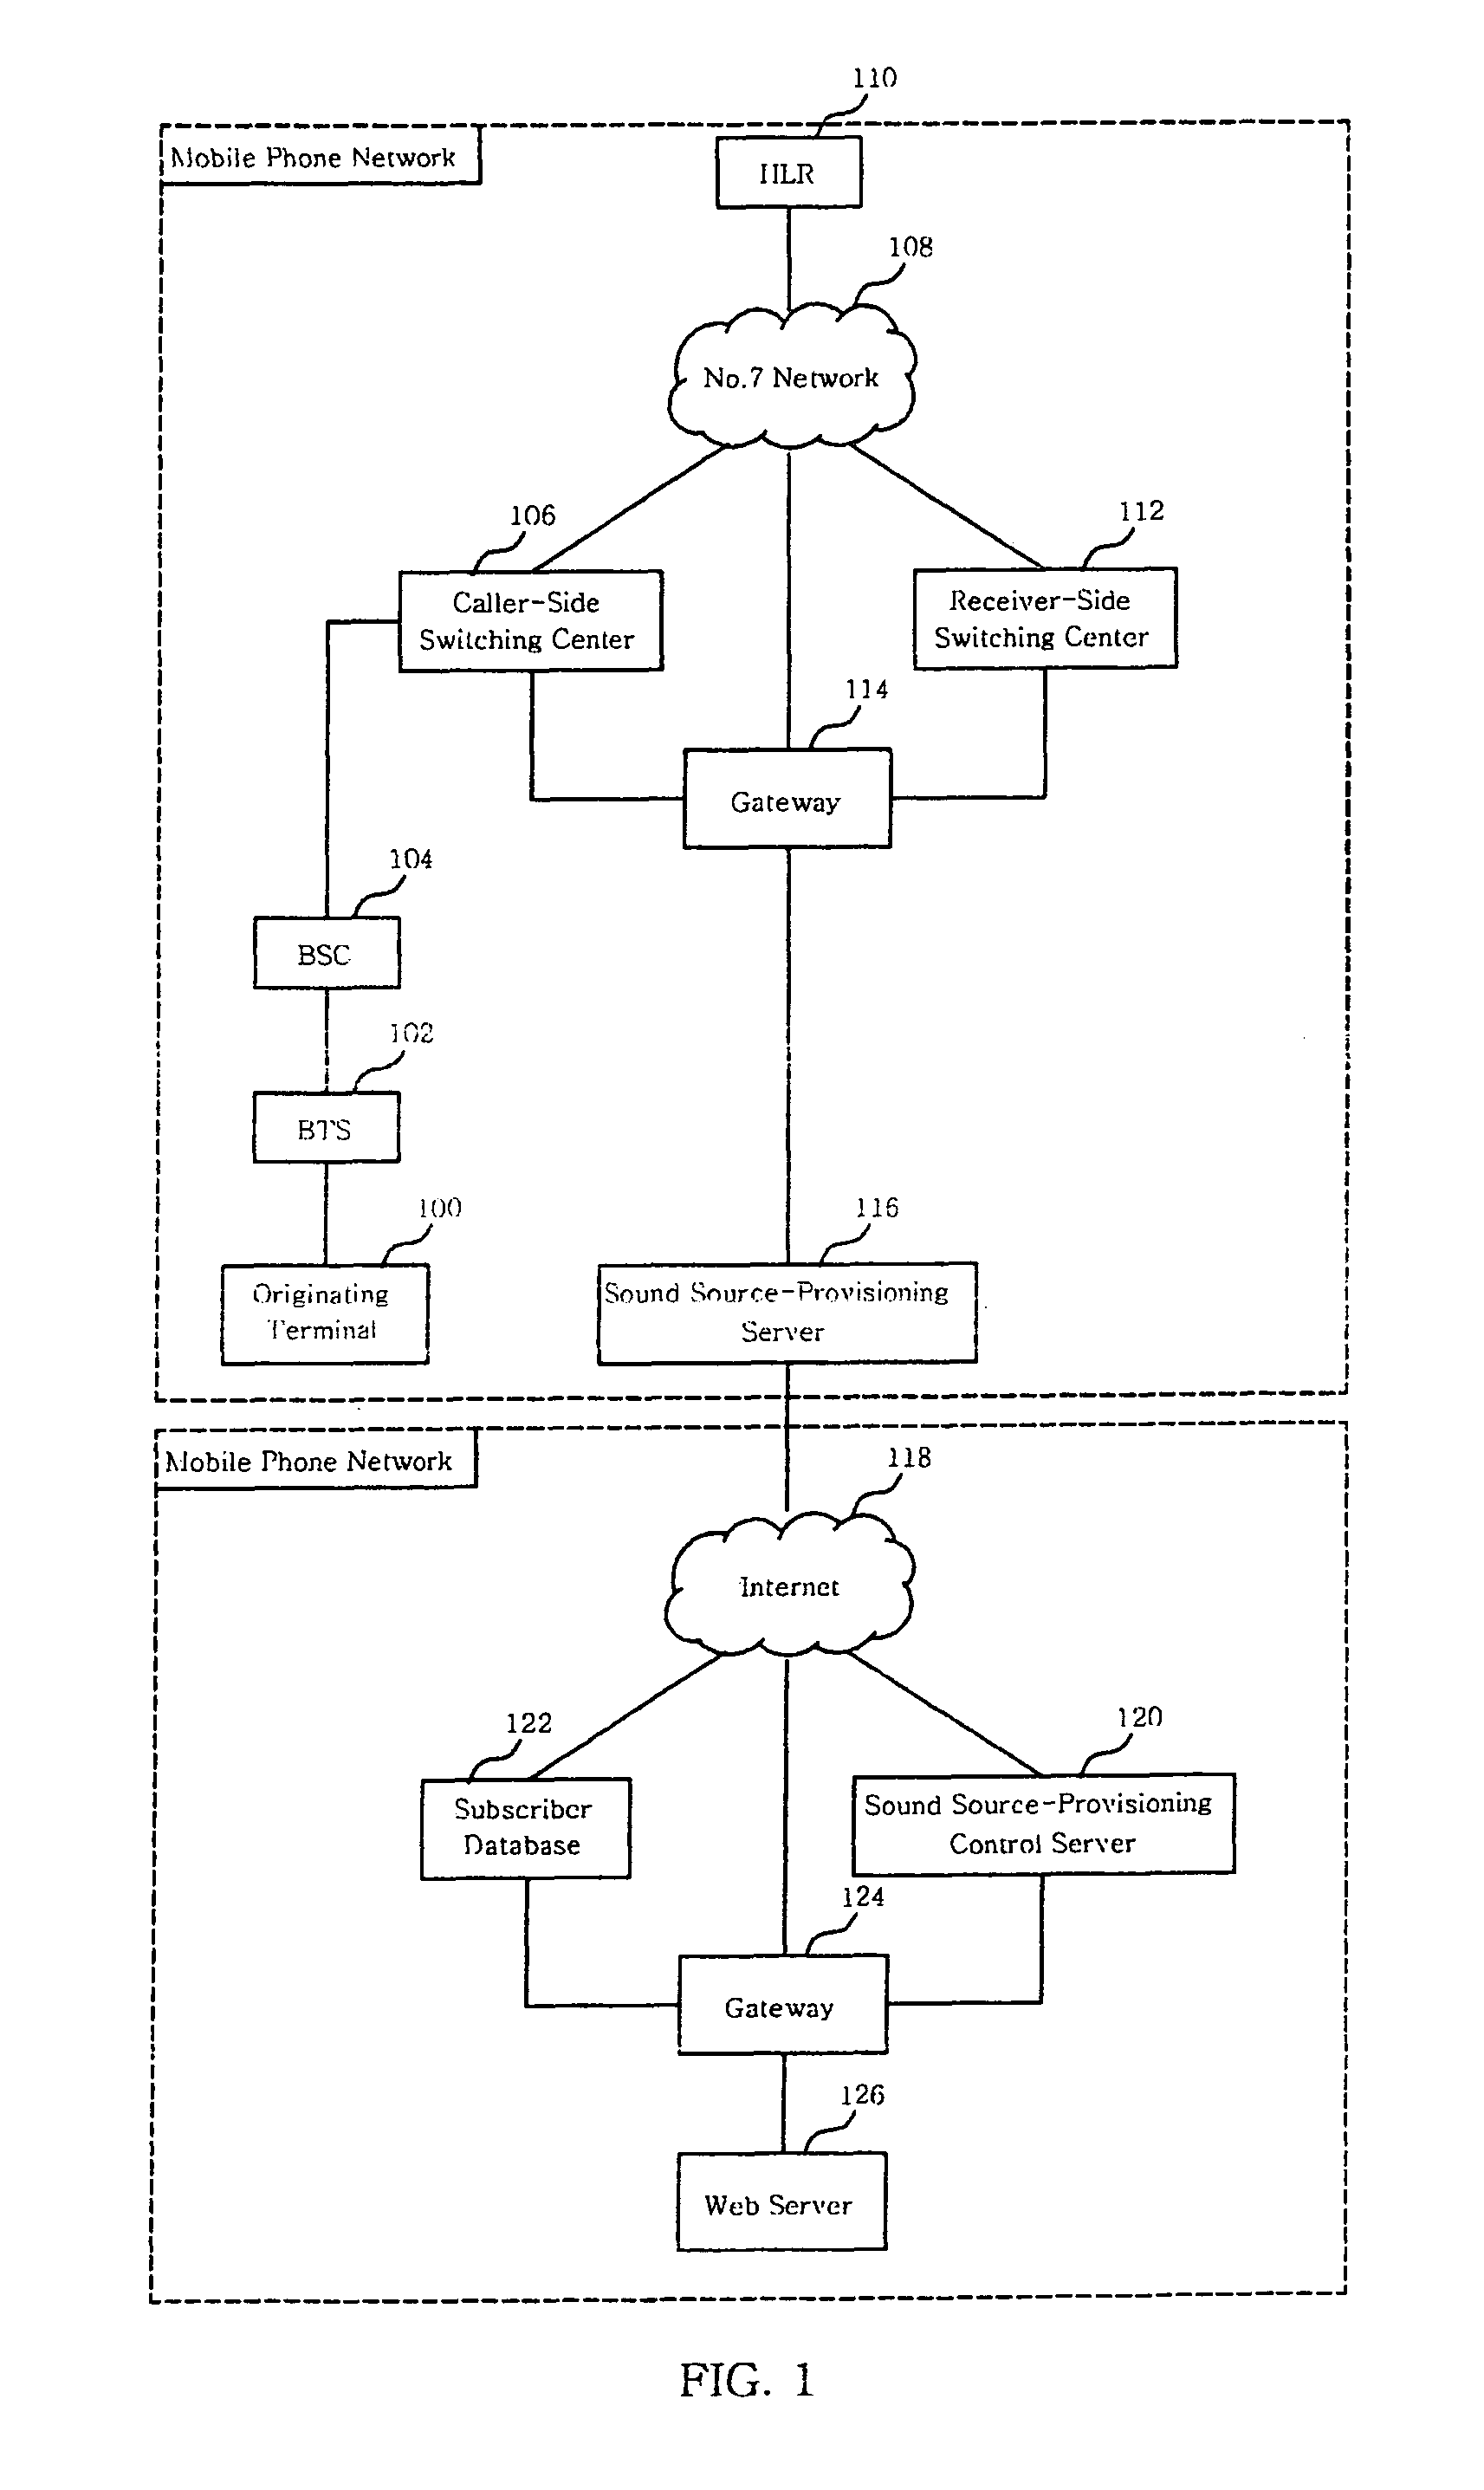 Method and system for providing multimedia ring back tone service by using receiver-side switching center